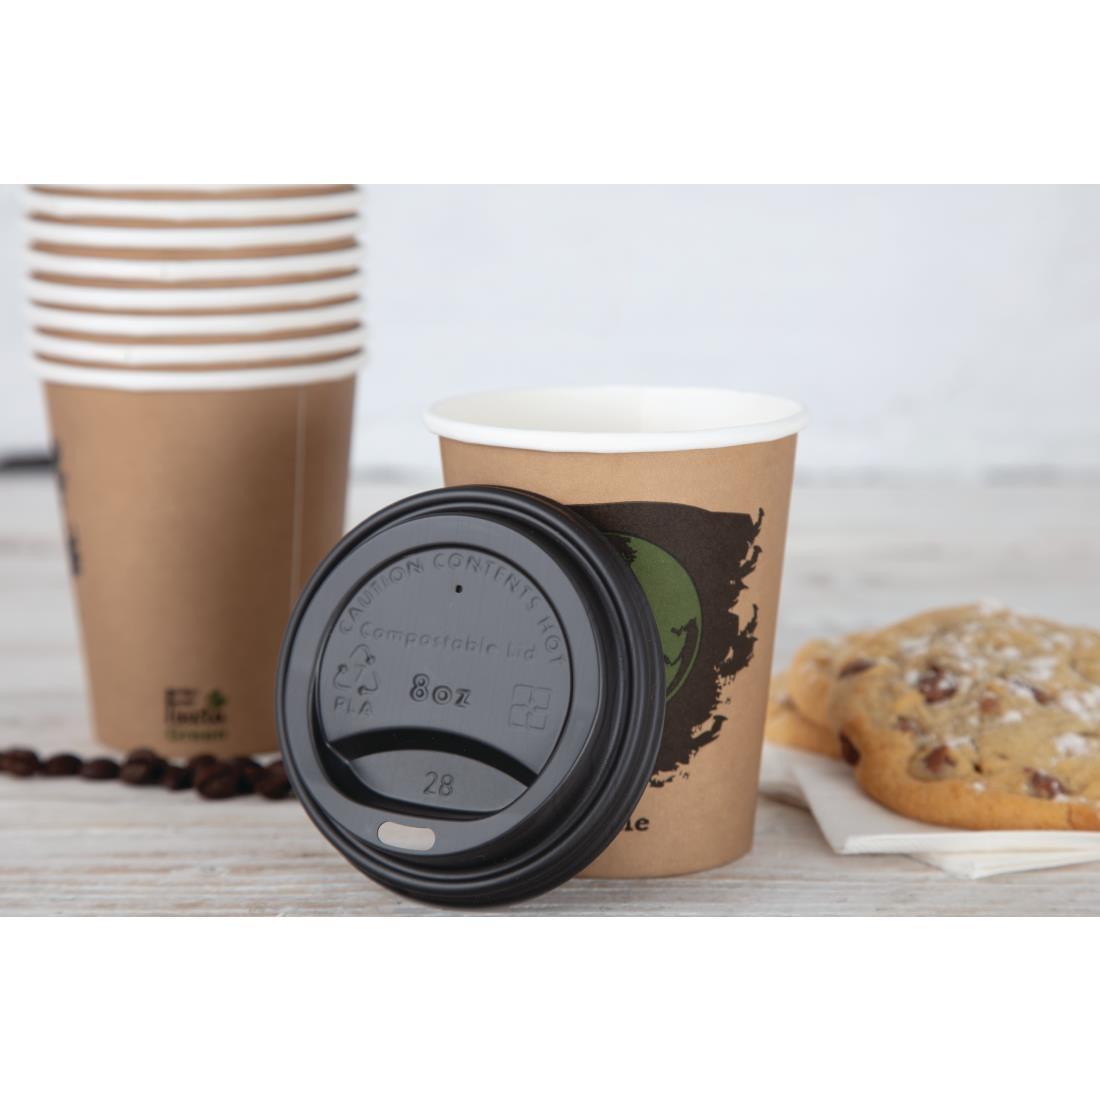 Fiesta Compostable Coffee Cups Single Wall 225ml / 8oz (Pack of 50) - DS057  - 7